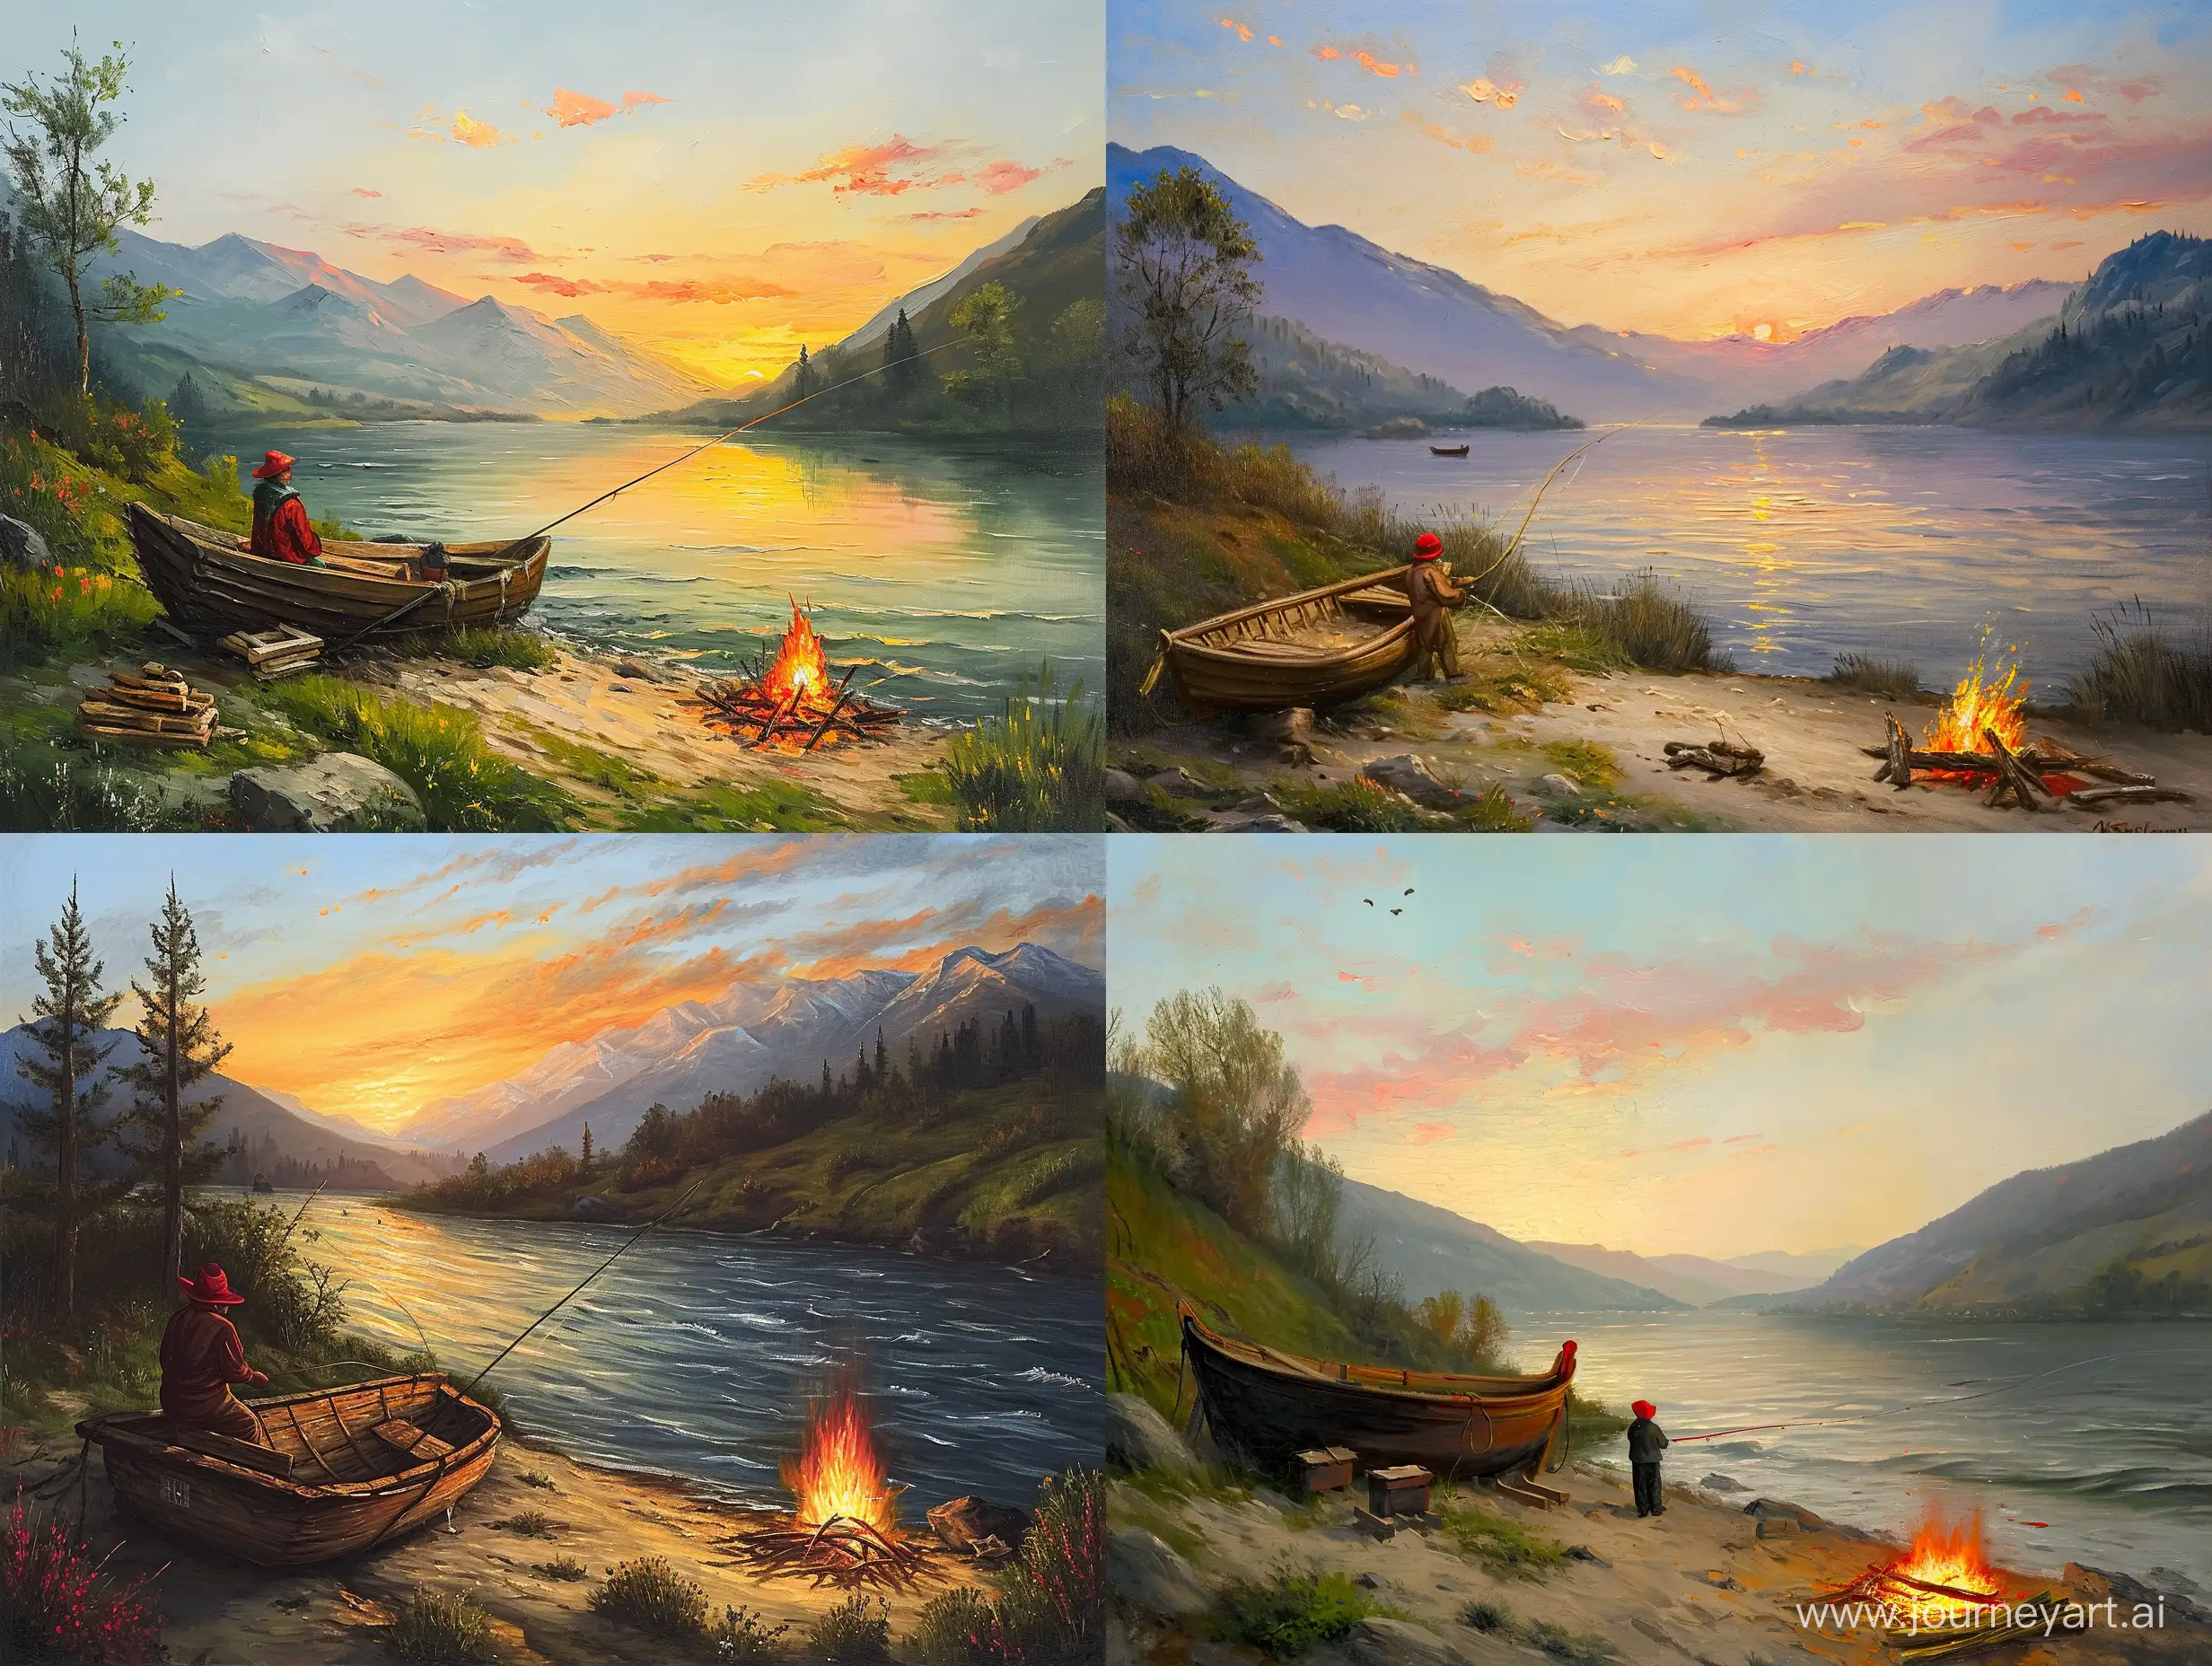 Serene-Mountain-Sunset-Fisherman-Fishing-by-the-River-with-Wooden-Boat-and-Bonfire